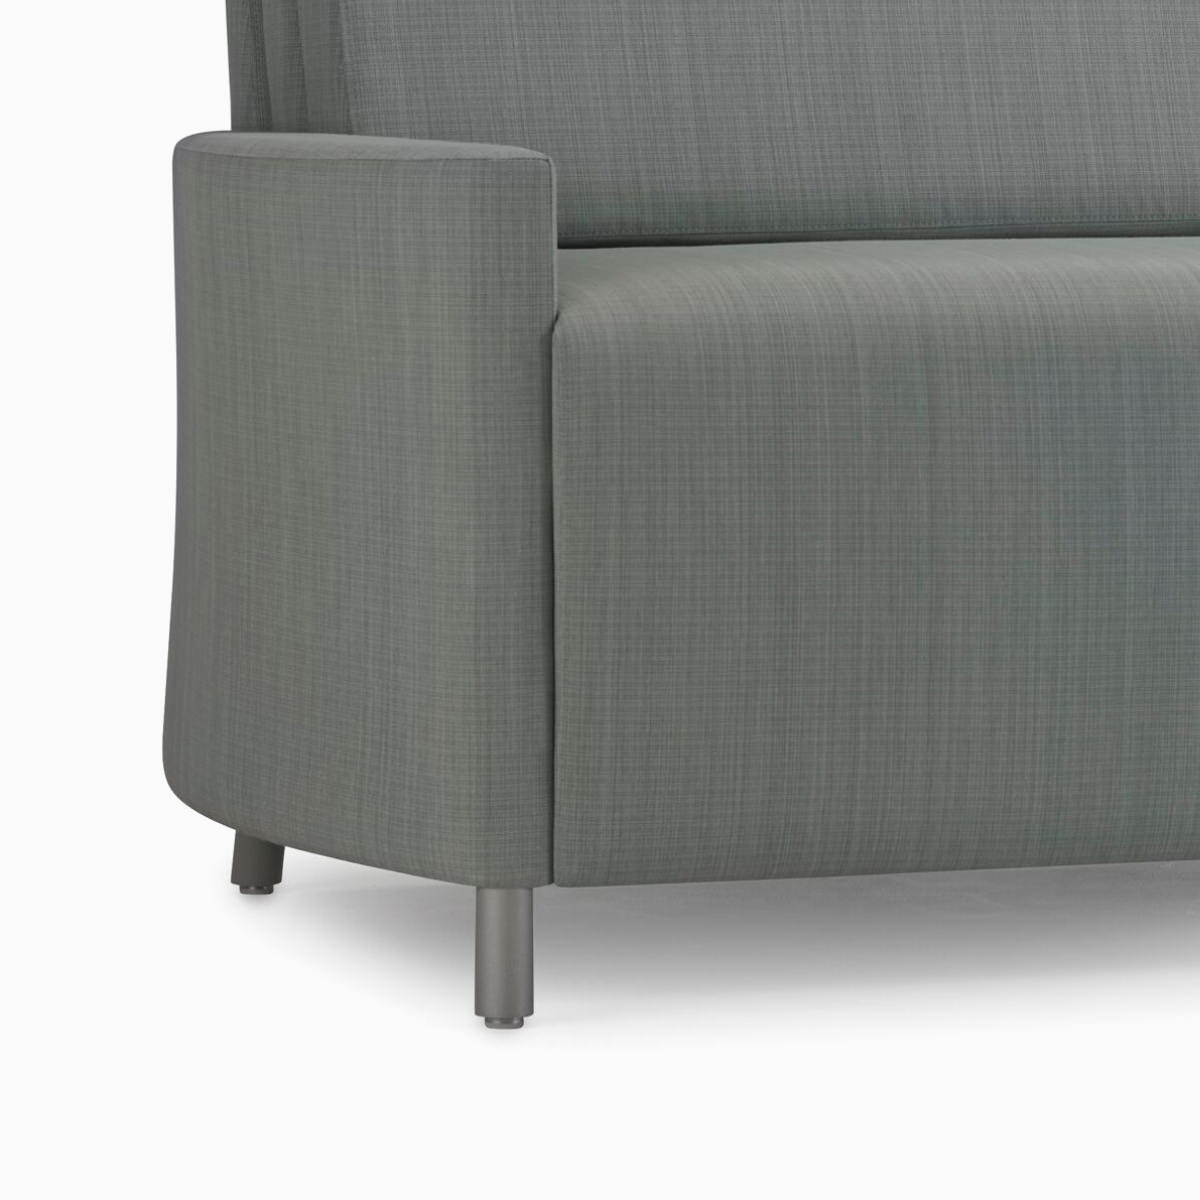 An angled view of a Nemschoff Pamona Flop Sofa in gray textile with metal legs.